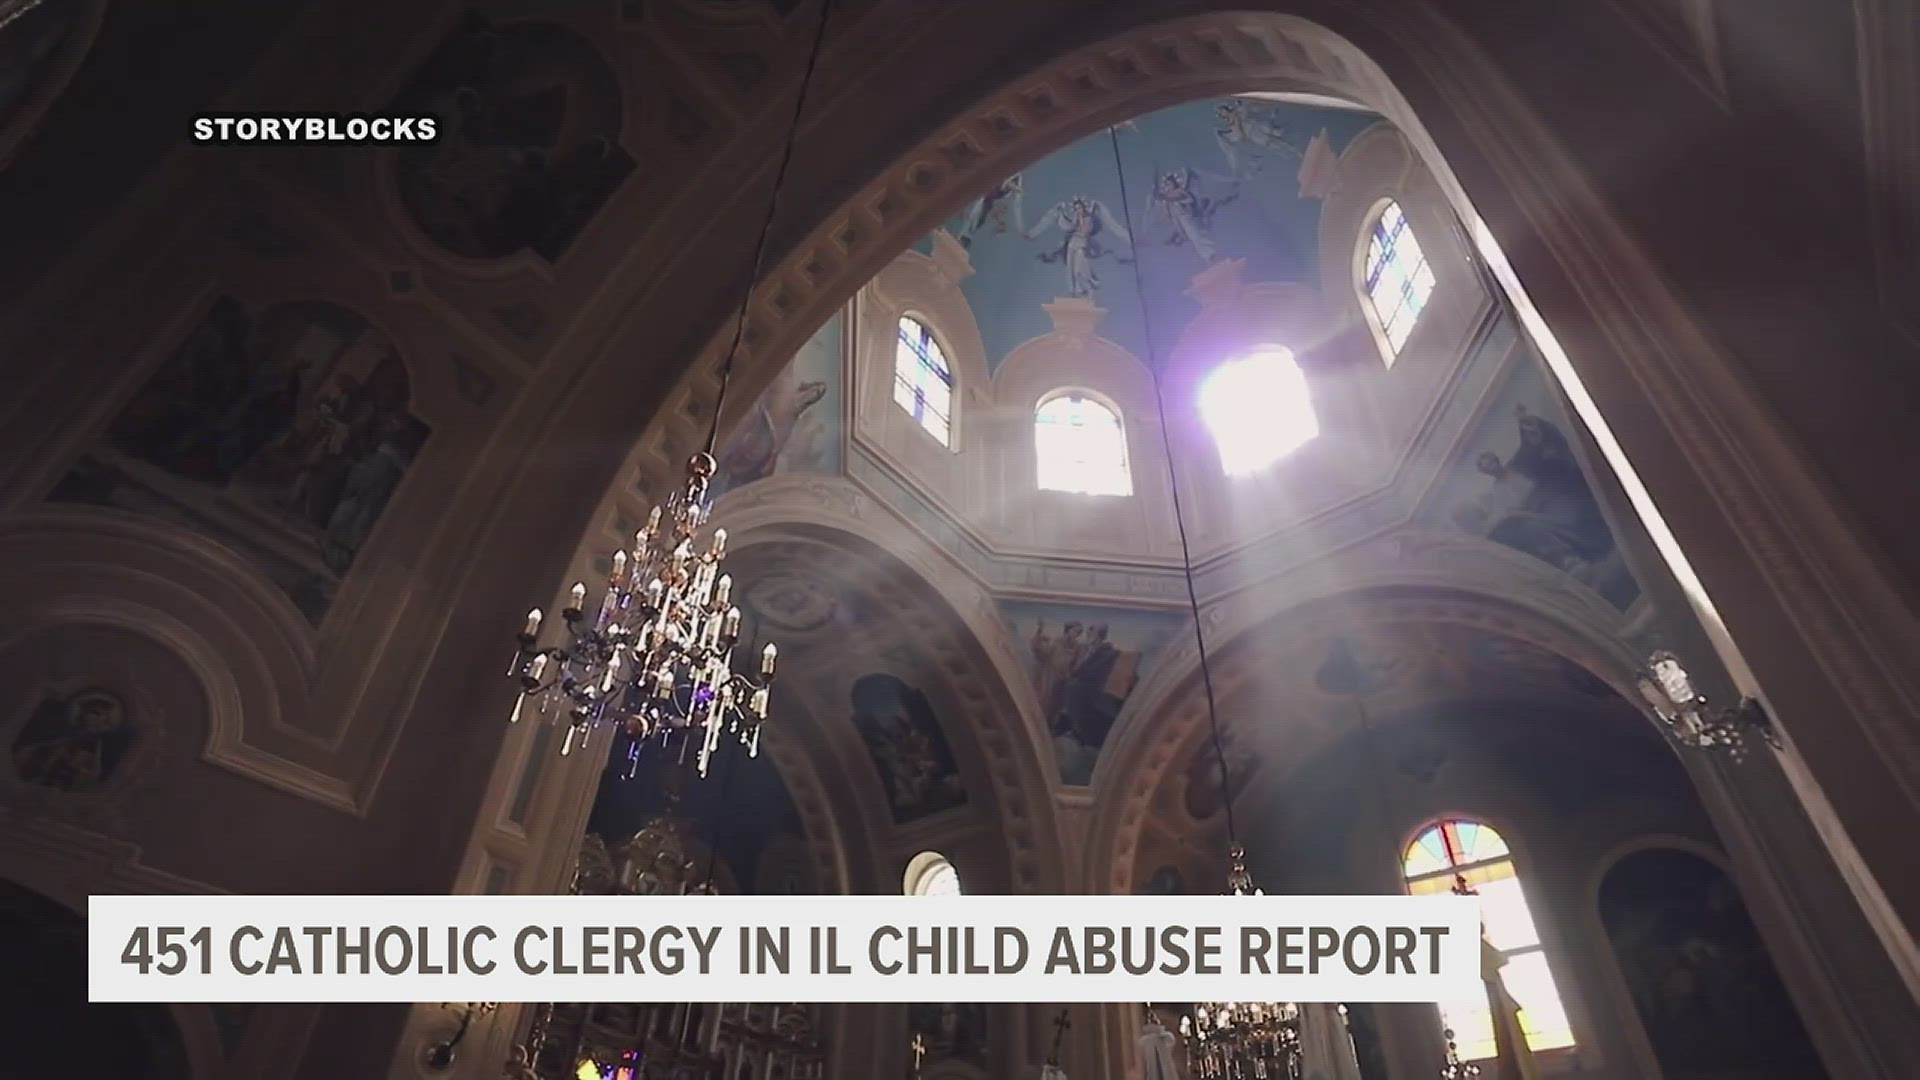 The report covers abuse that allegedly took place as early as the 1950s, with at least 12 clergy figures that served and/or allegedly abused in our viewing area.